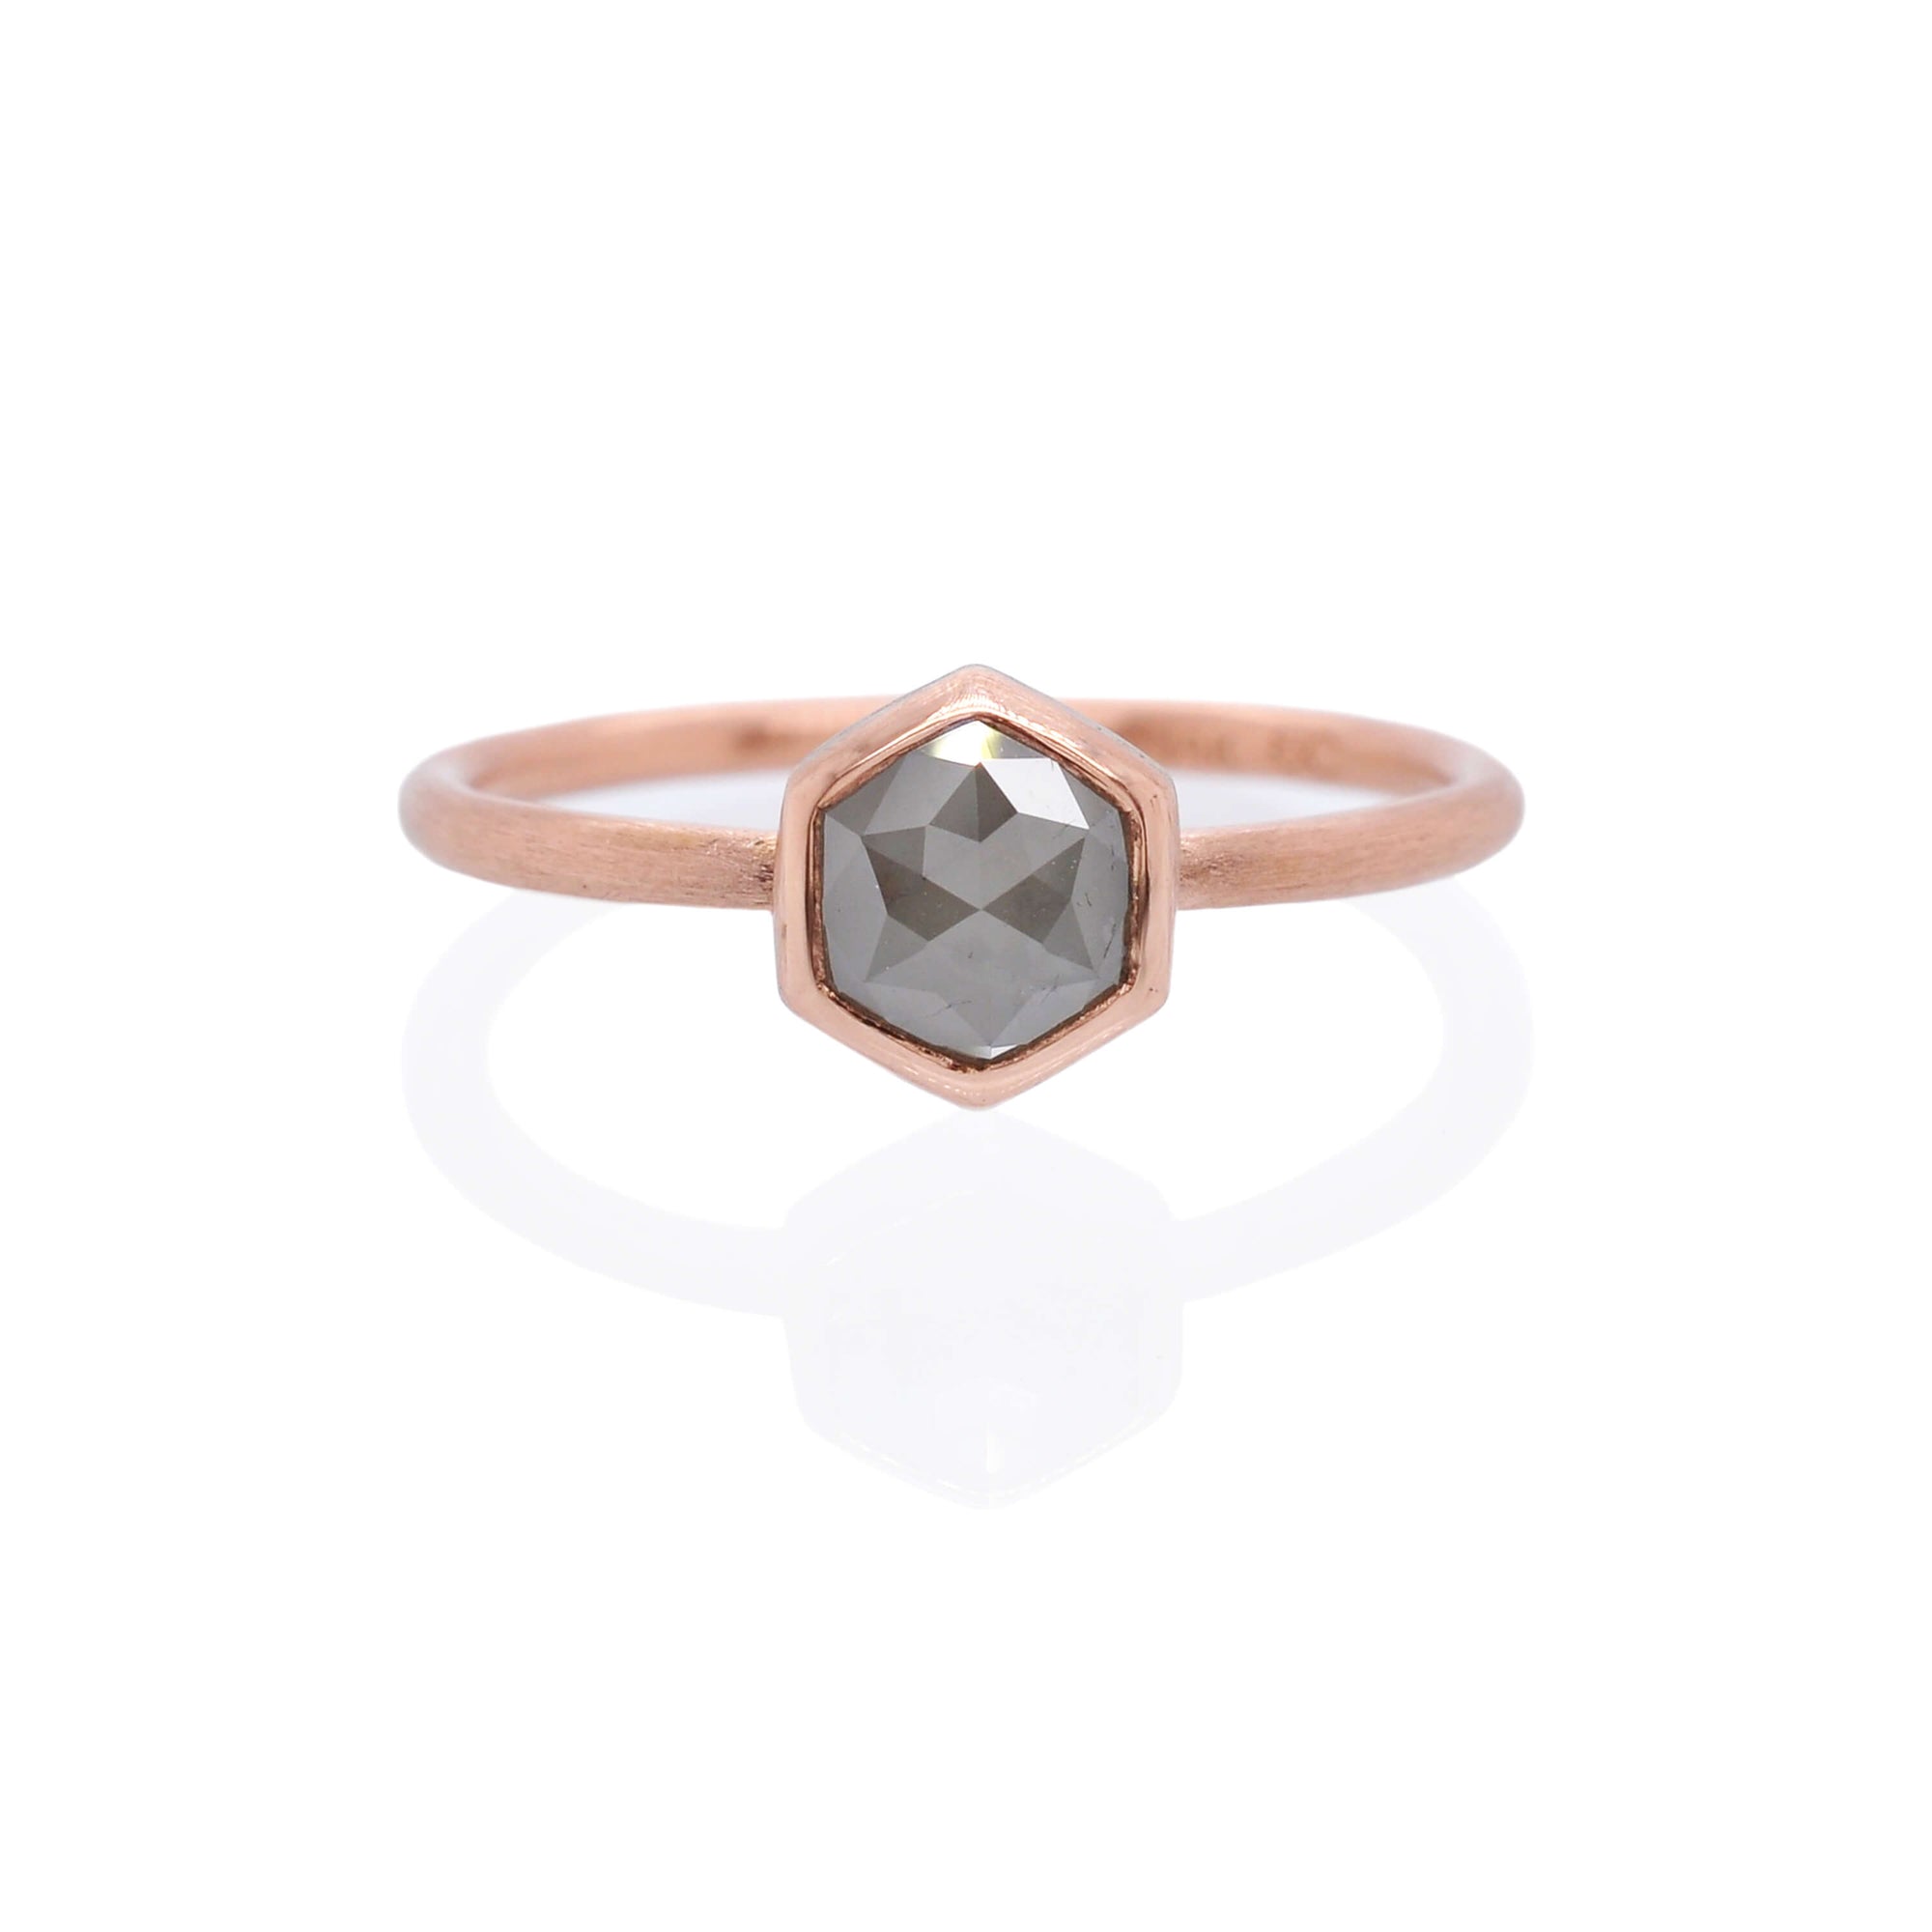 Gray rose cut hexagonal diamond in satin rose gold. Handmade by EC Design Jewelry in Minneapolis, MN using recycled metal and conflict-free stone.